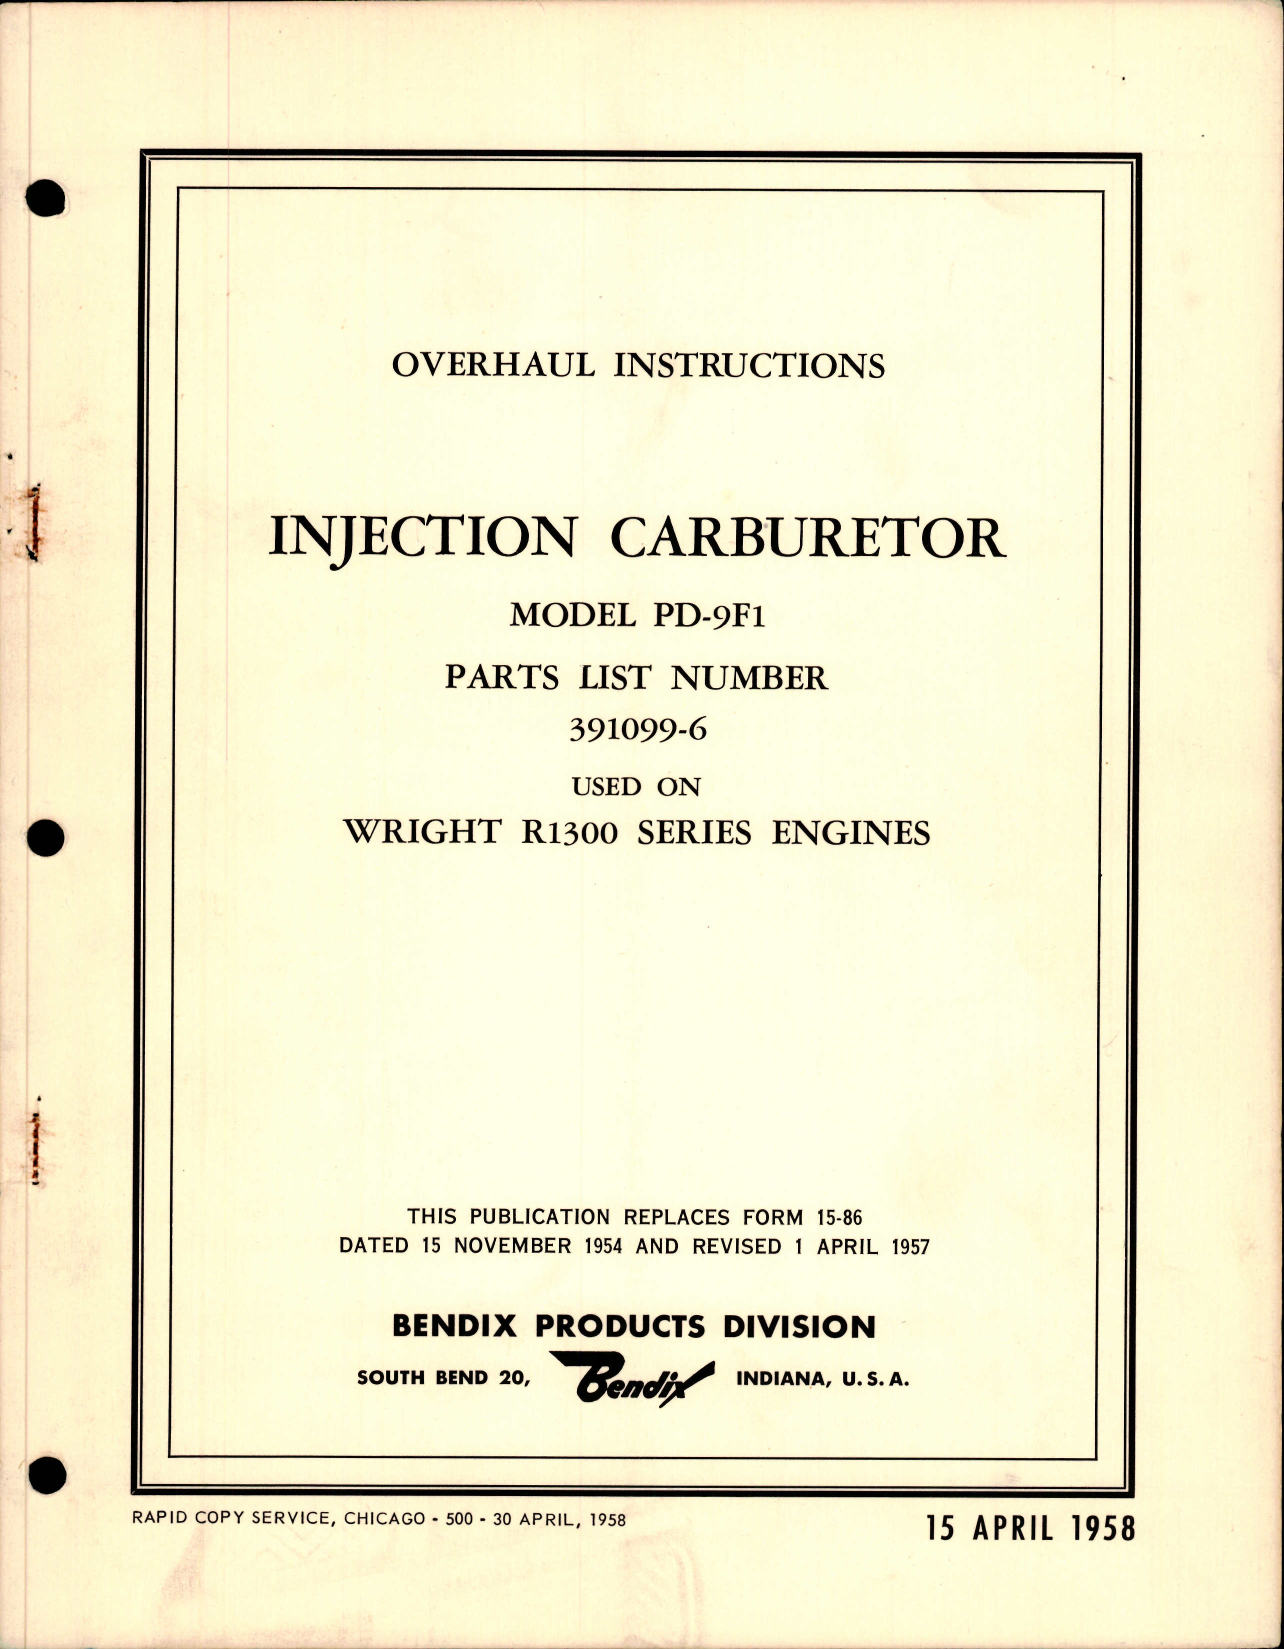 Sample page 1 from AirCorps Library document: Overhaul Instructions for Injection Carburetors Model PD-9F1 Used on R-1300 Engines